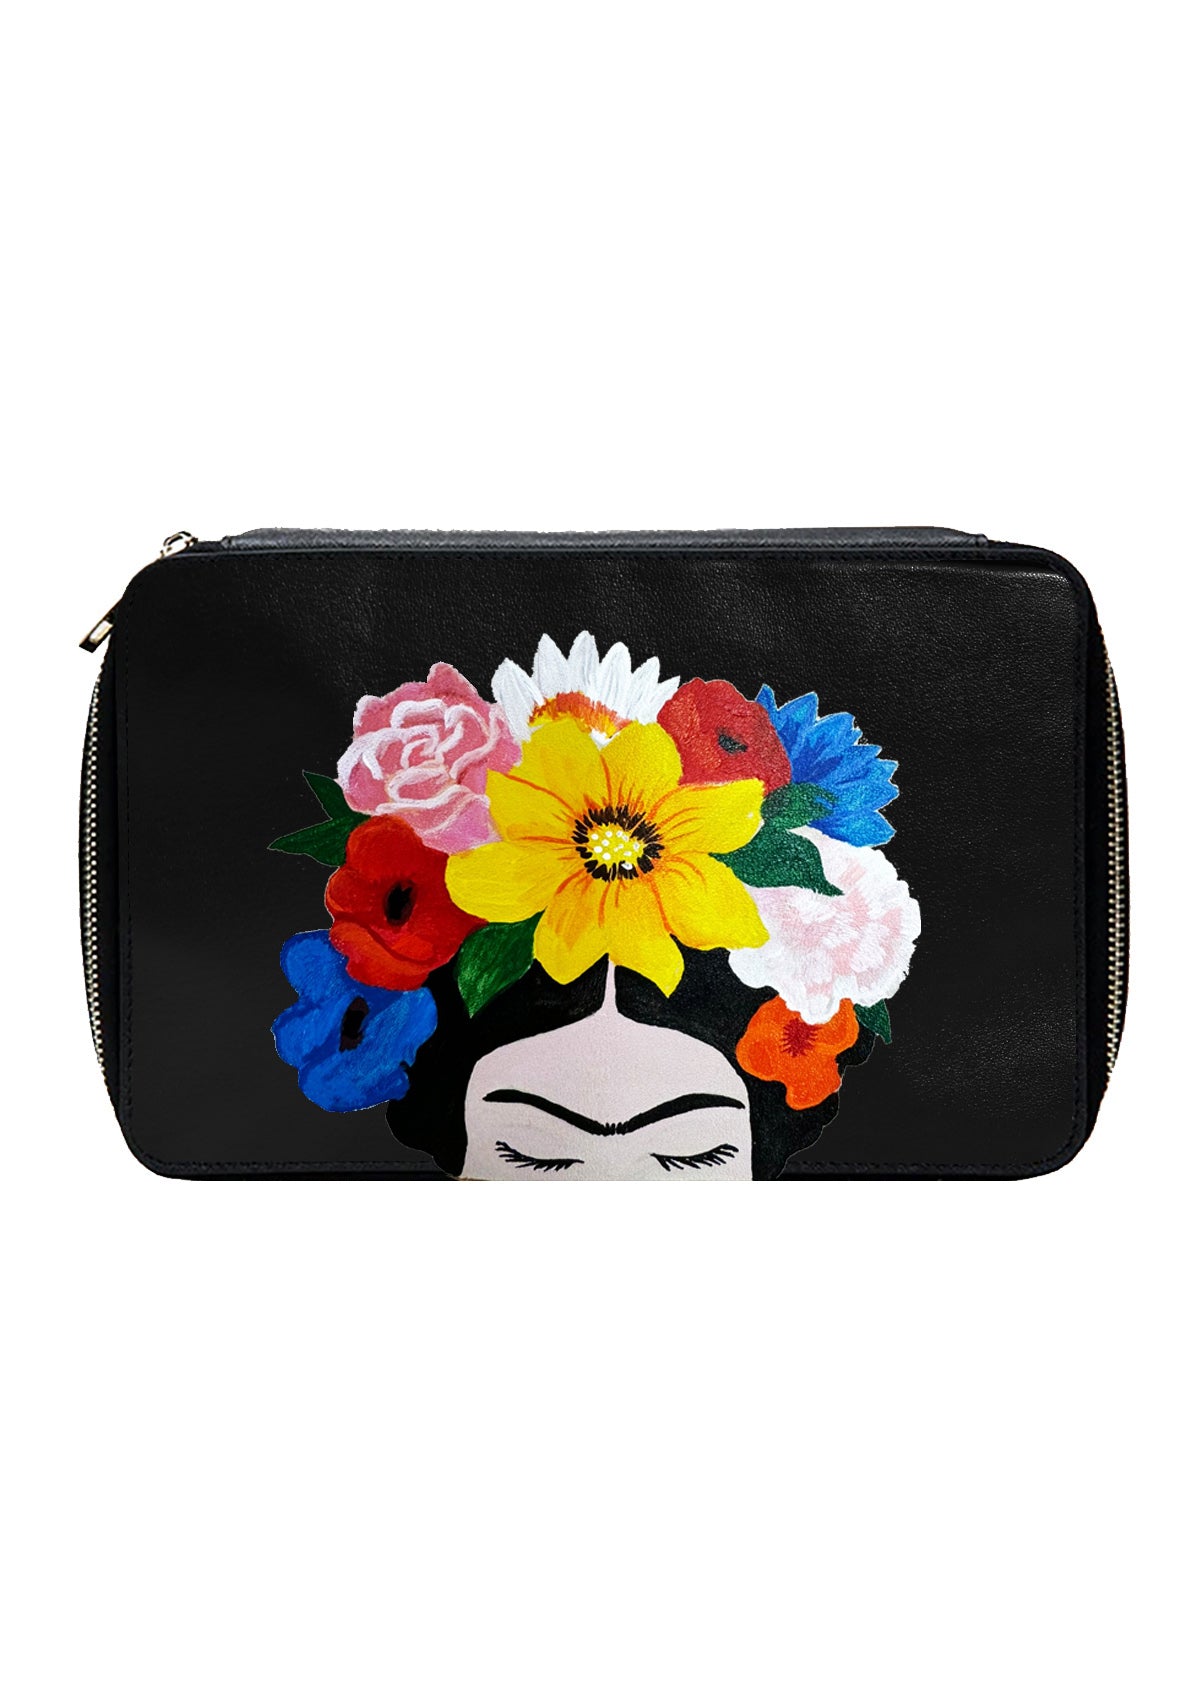 Her Floral Crown Black Pouch